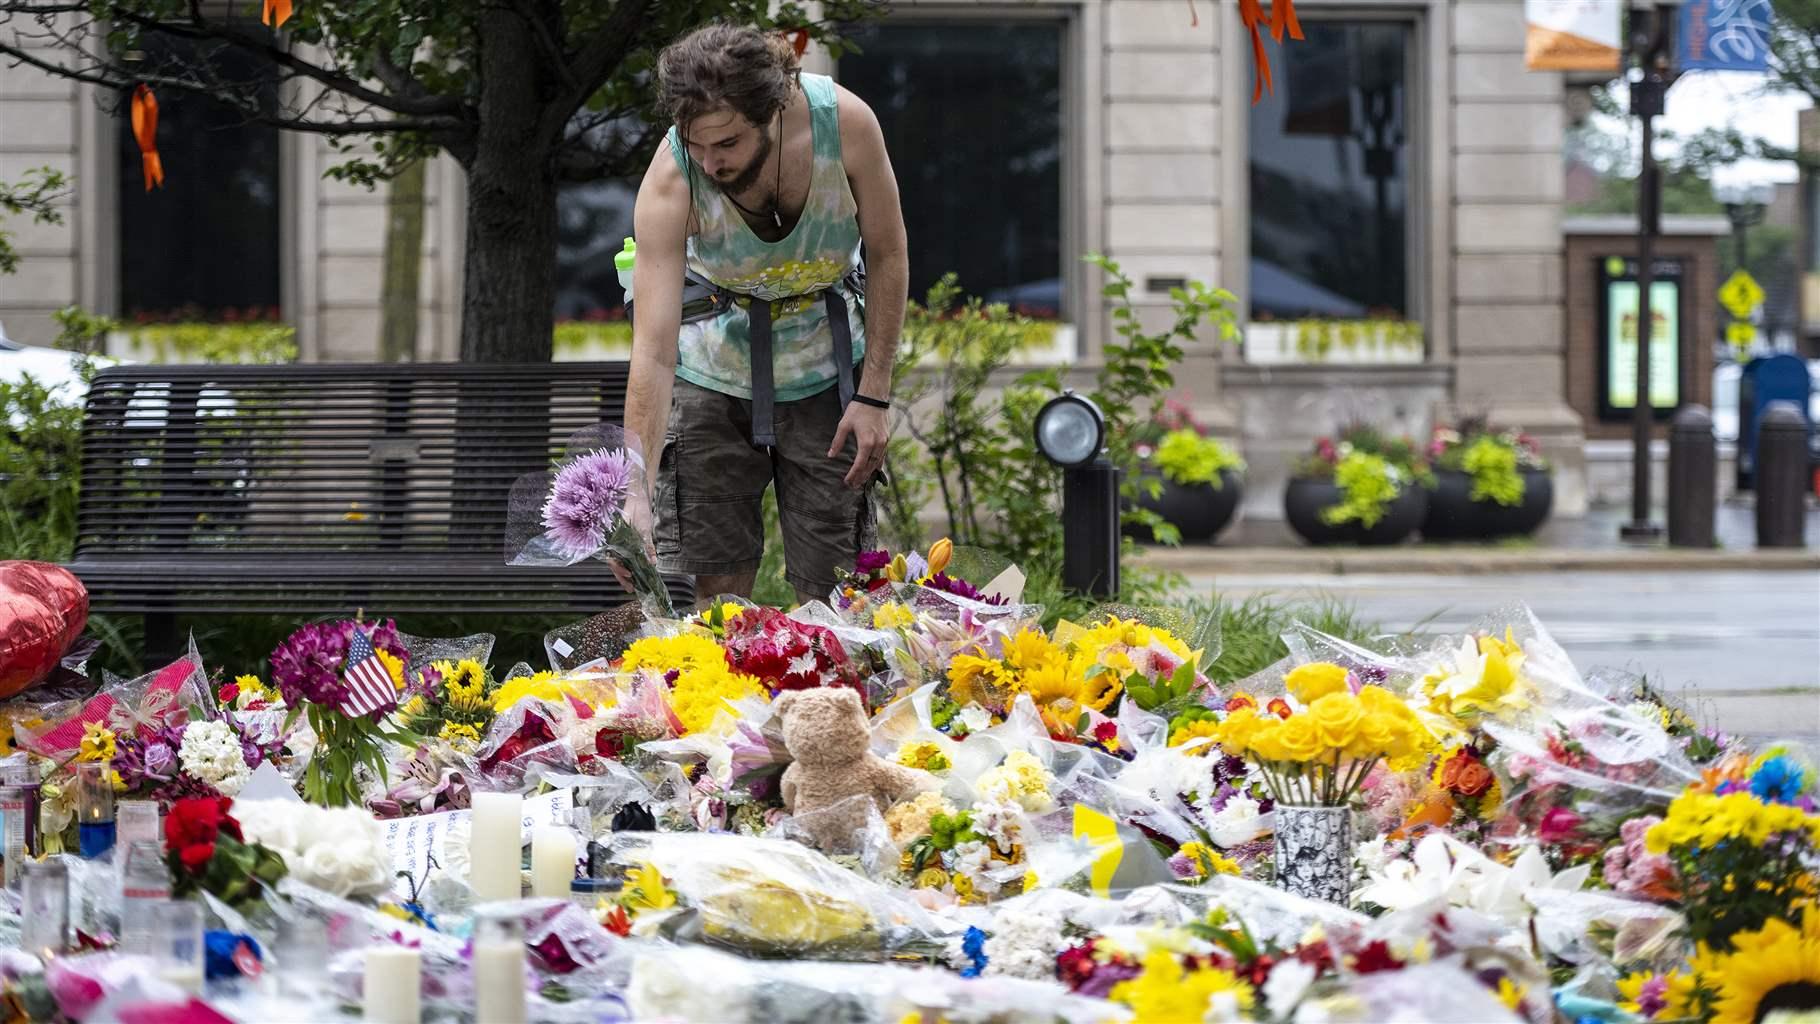 A mourner places flowers at a memorial to the victims of the July 4th mass shooting in Highland Park, IL on Friday July 8, 2022. (Photo by Christopher Dilts / Sipa USA)(Sipa via AP Images)